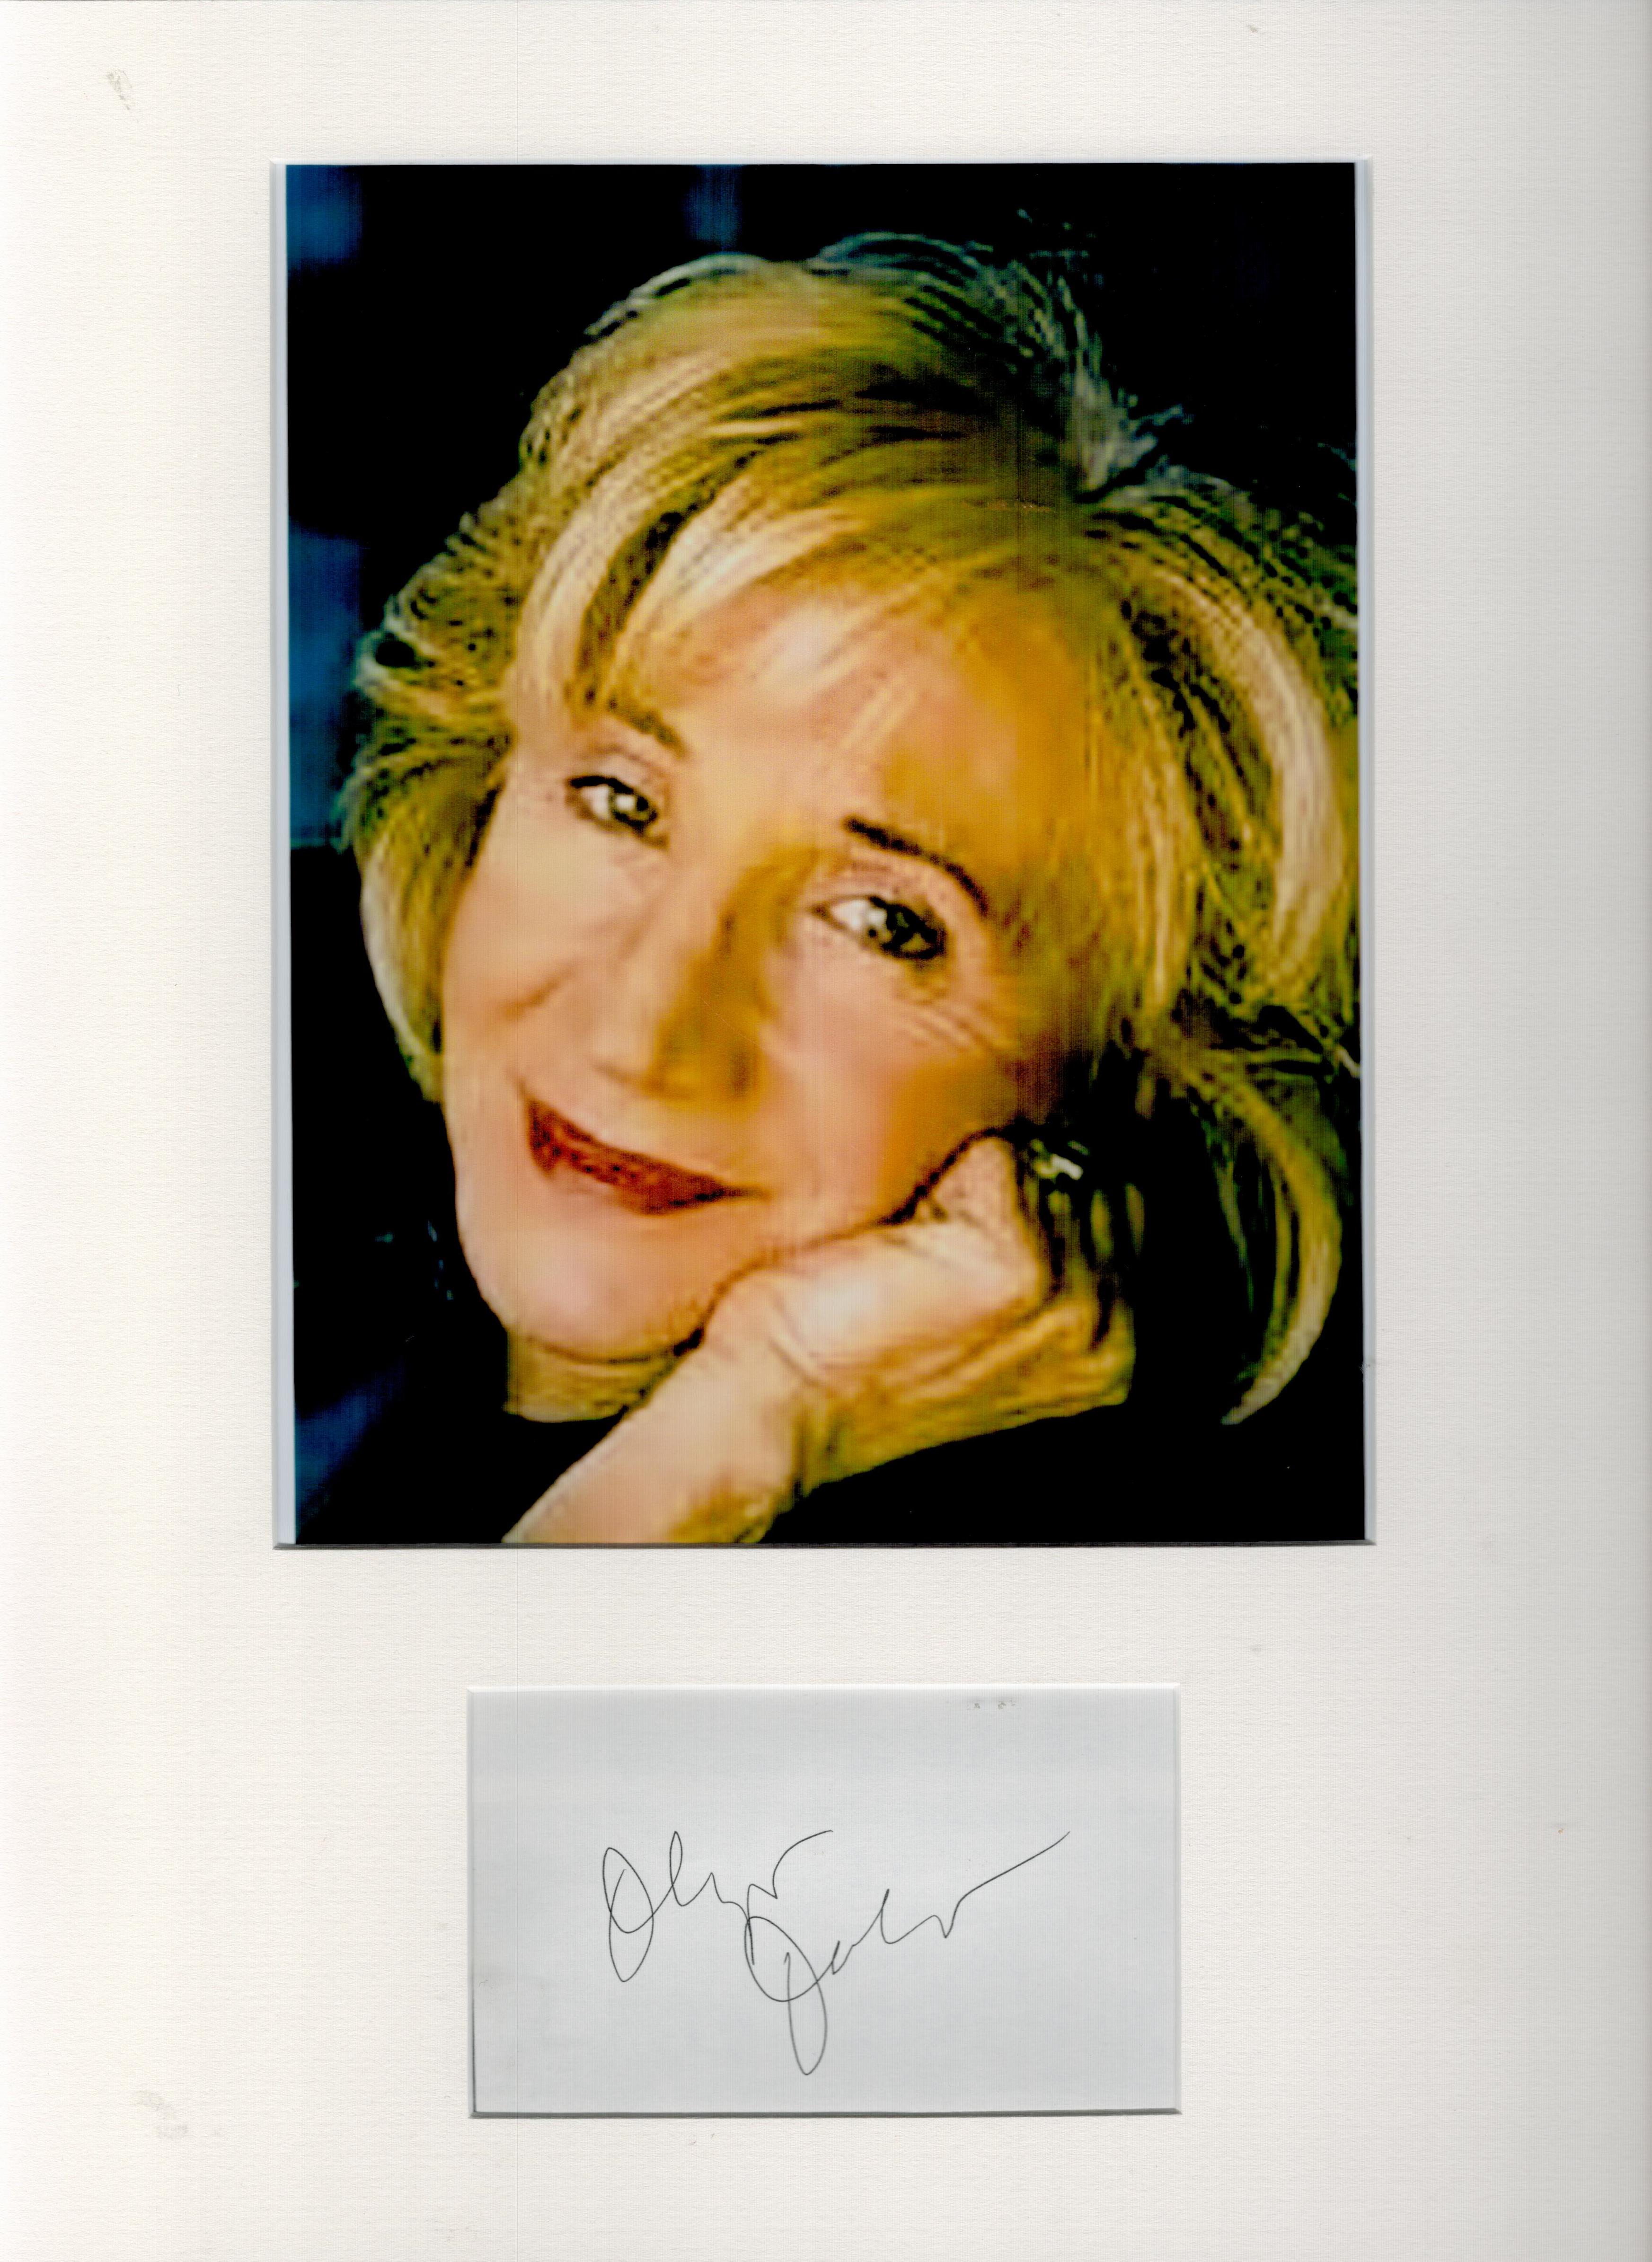 Actor, Olympia Dukakis mounted signature piece, overall size 16x12. This beautiful item features a